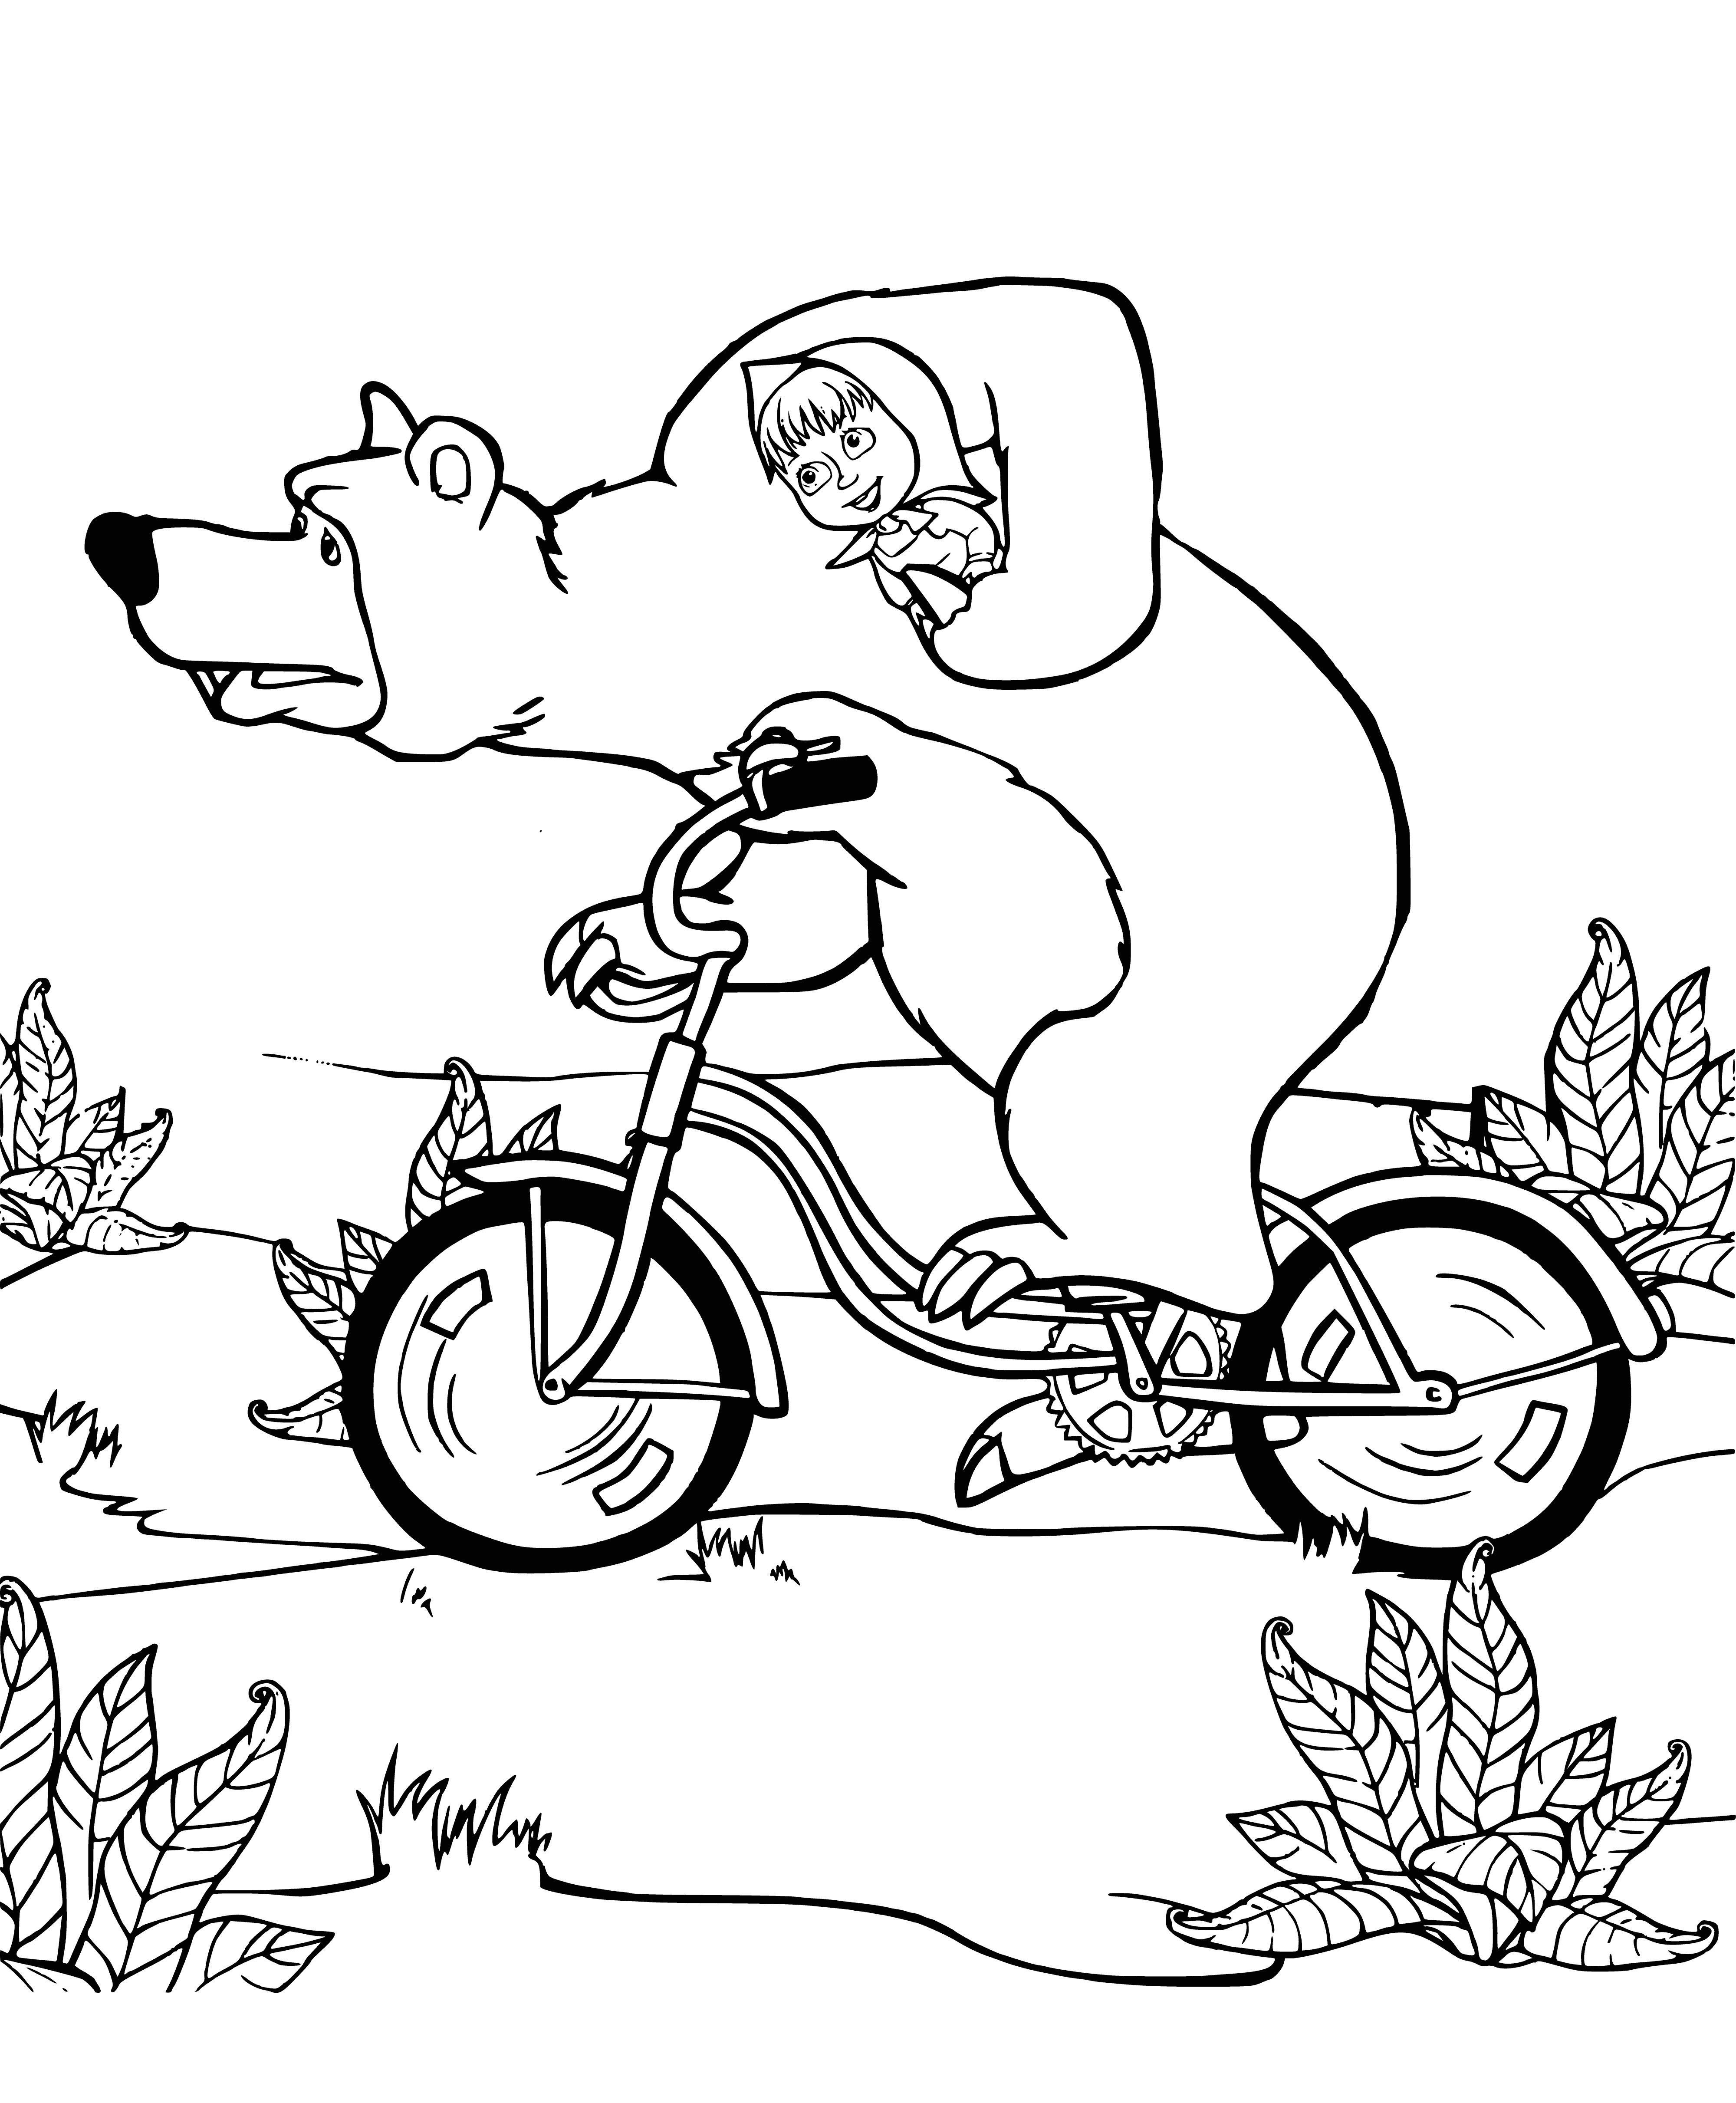 coloring page: Bear and Masha ride bike together, Masha shouting and waving her arms, Bear serious but pedaling and enjoying ride.